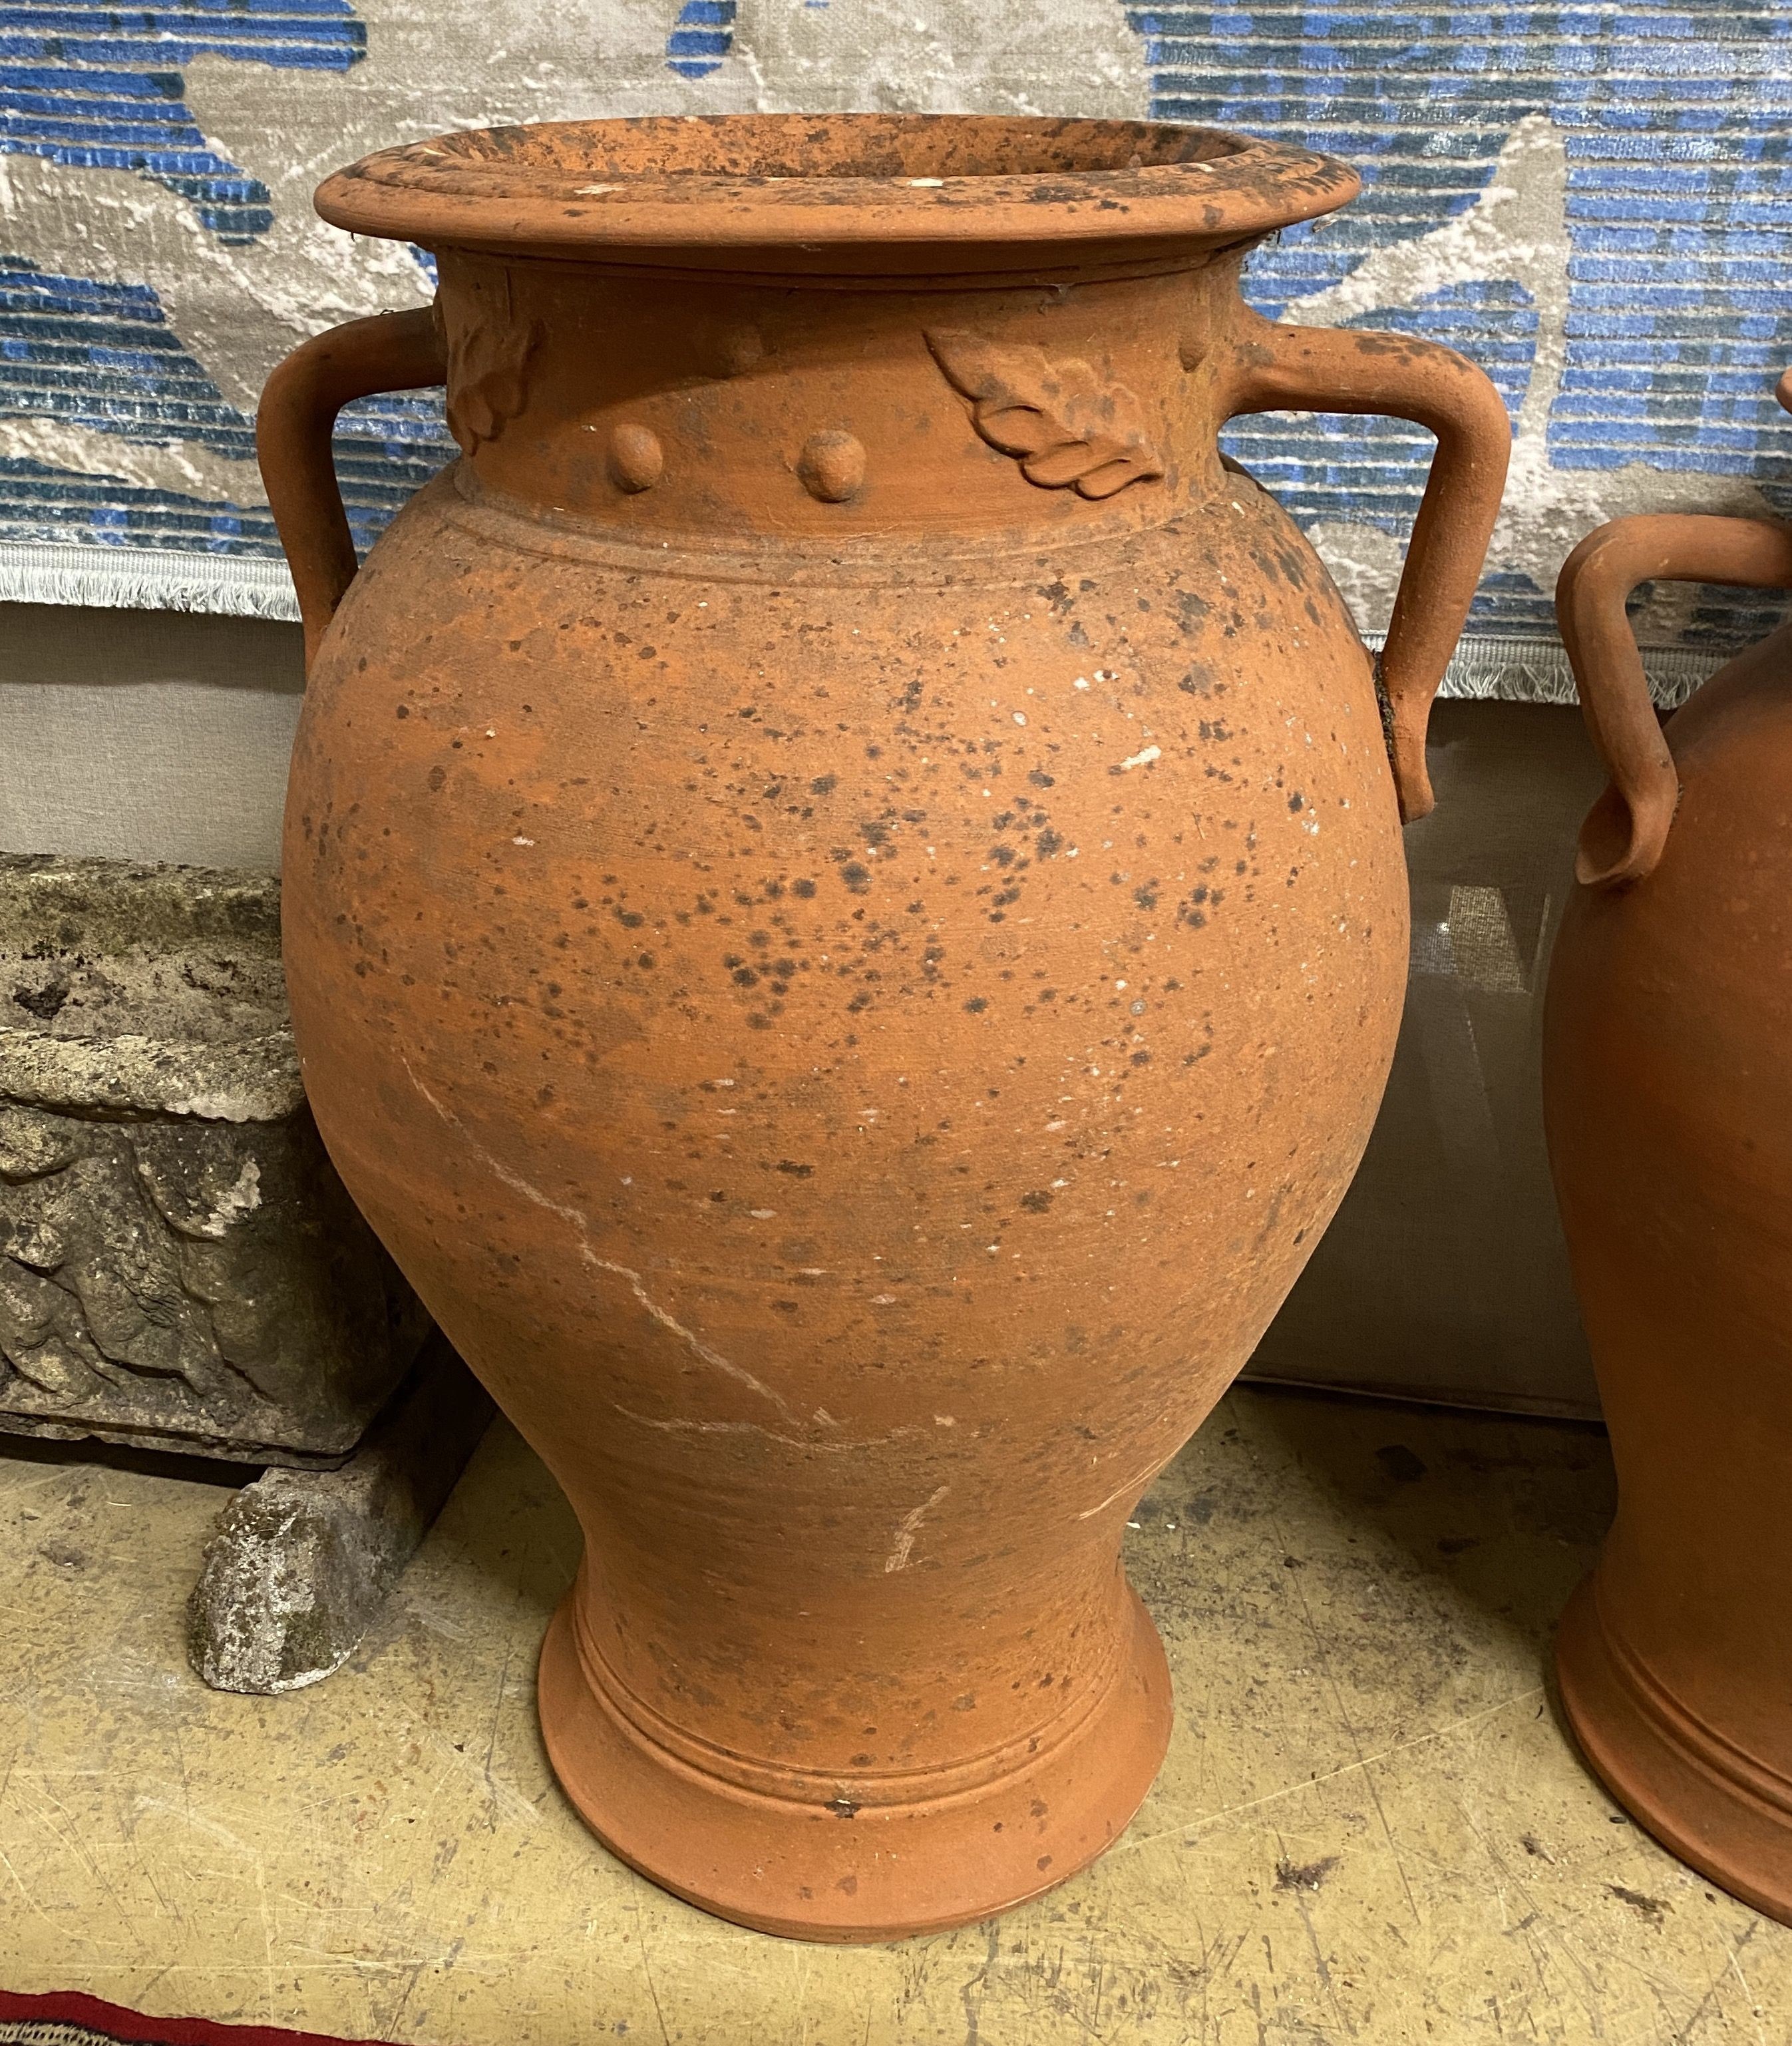 A set of three terracotta baluster garden urns moulded with leaves, largest height 72cm